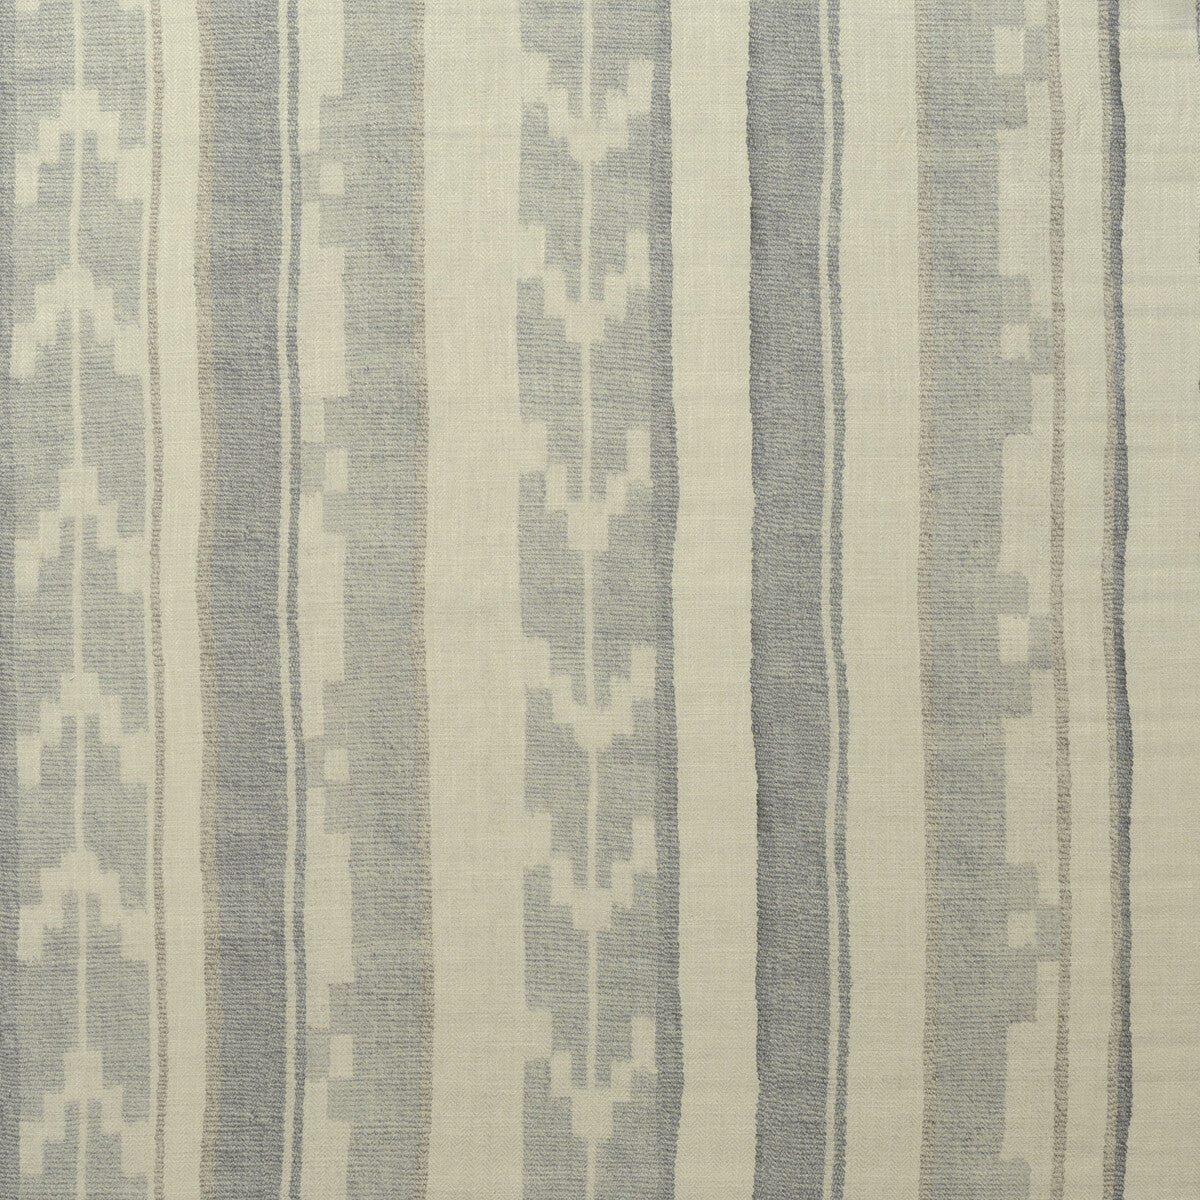 Indus fabric in cloud color - pattern AM100338.11.0 - by Kravet Couture in the Andrew Martin Hindukush collection